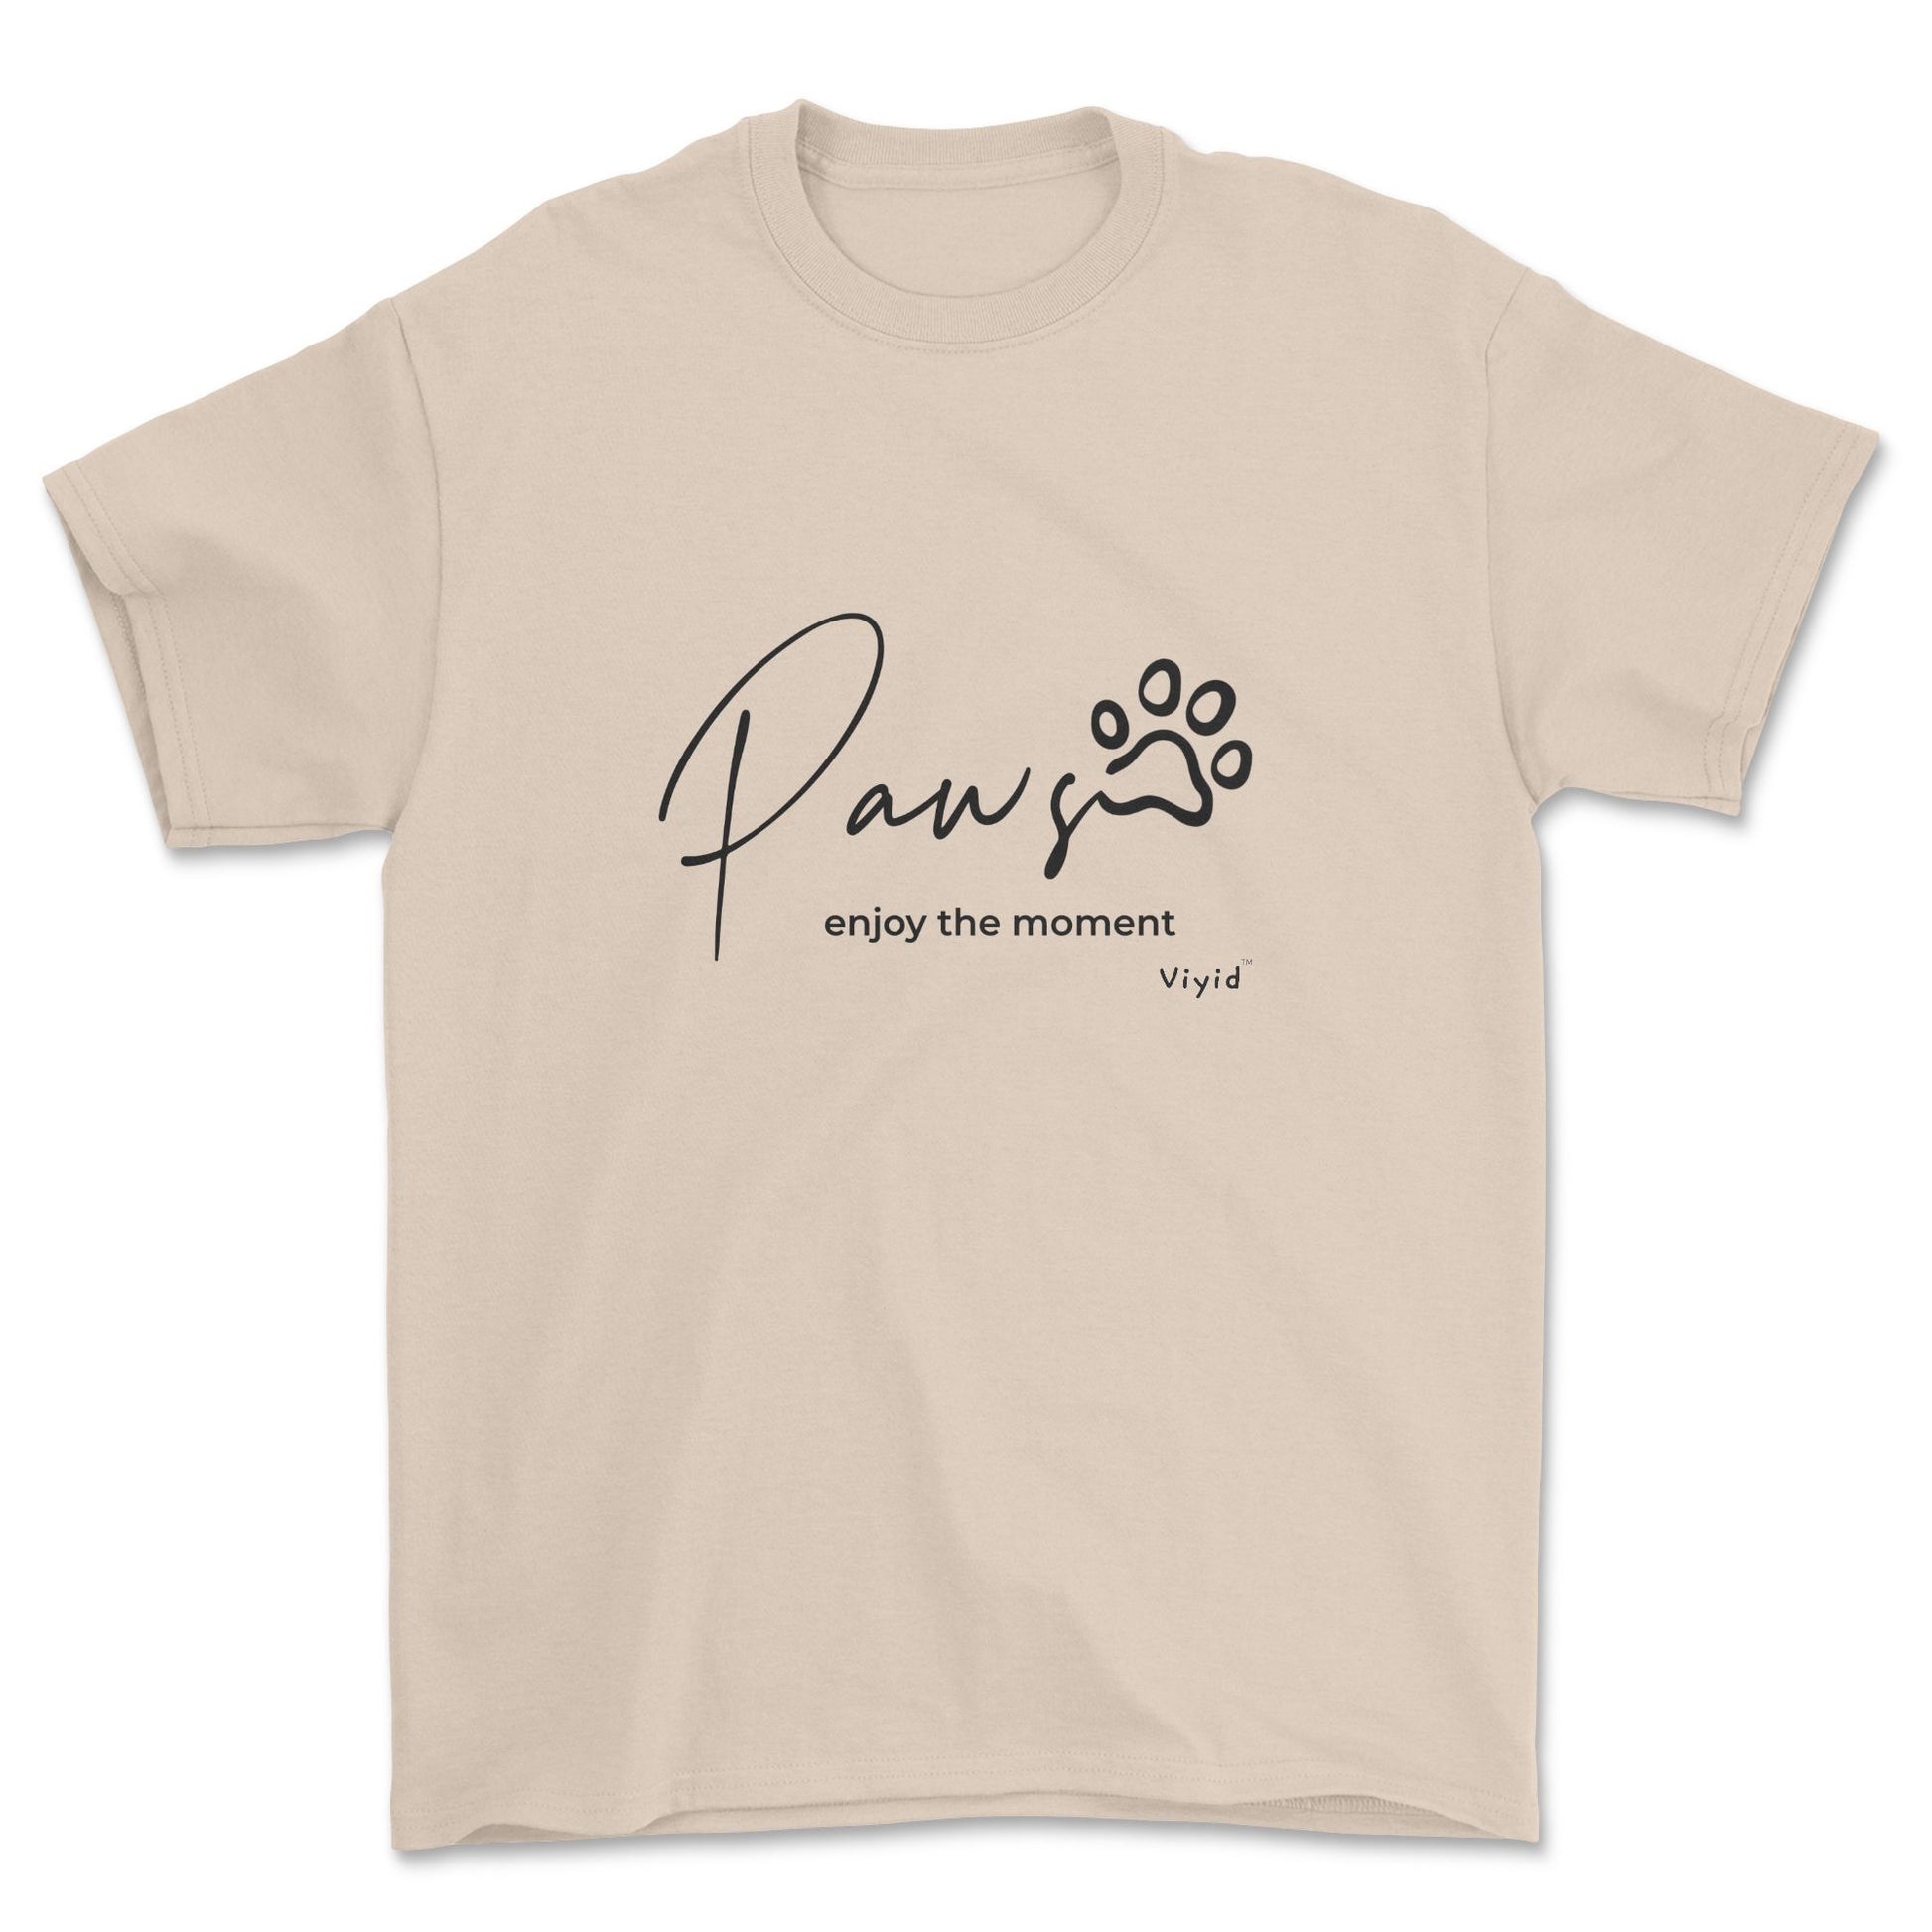 paws enjoy the moment adult t-shirt sand